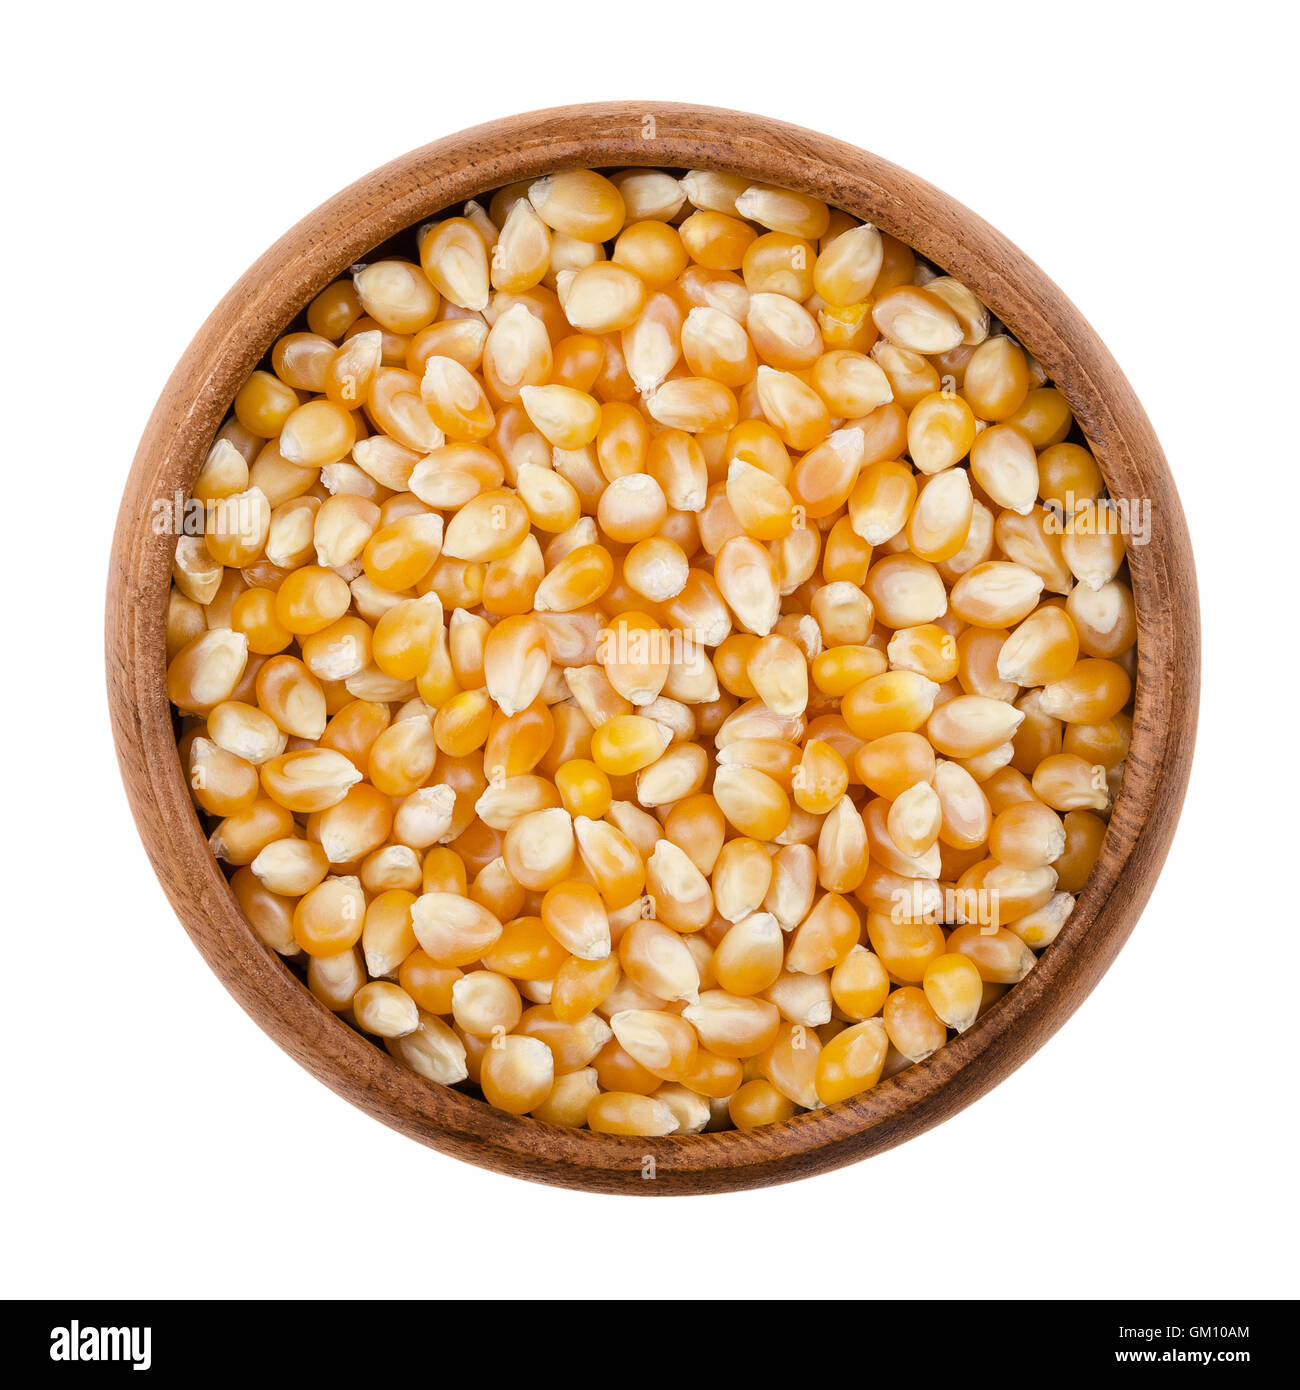 Unpopped popcorn in a wooden bowl on white background. A type of corn that expands from the kernel and puffs up when heated. Stock Photo